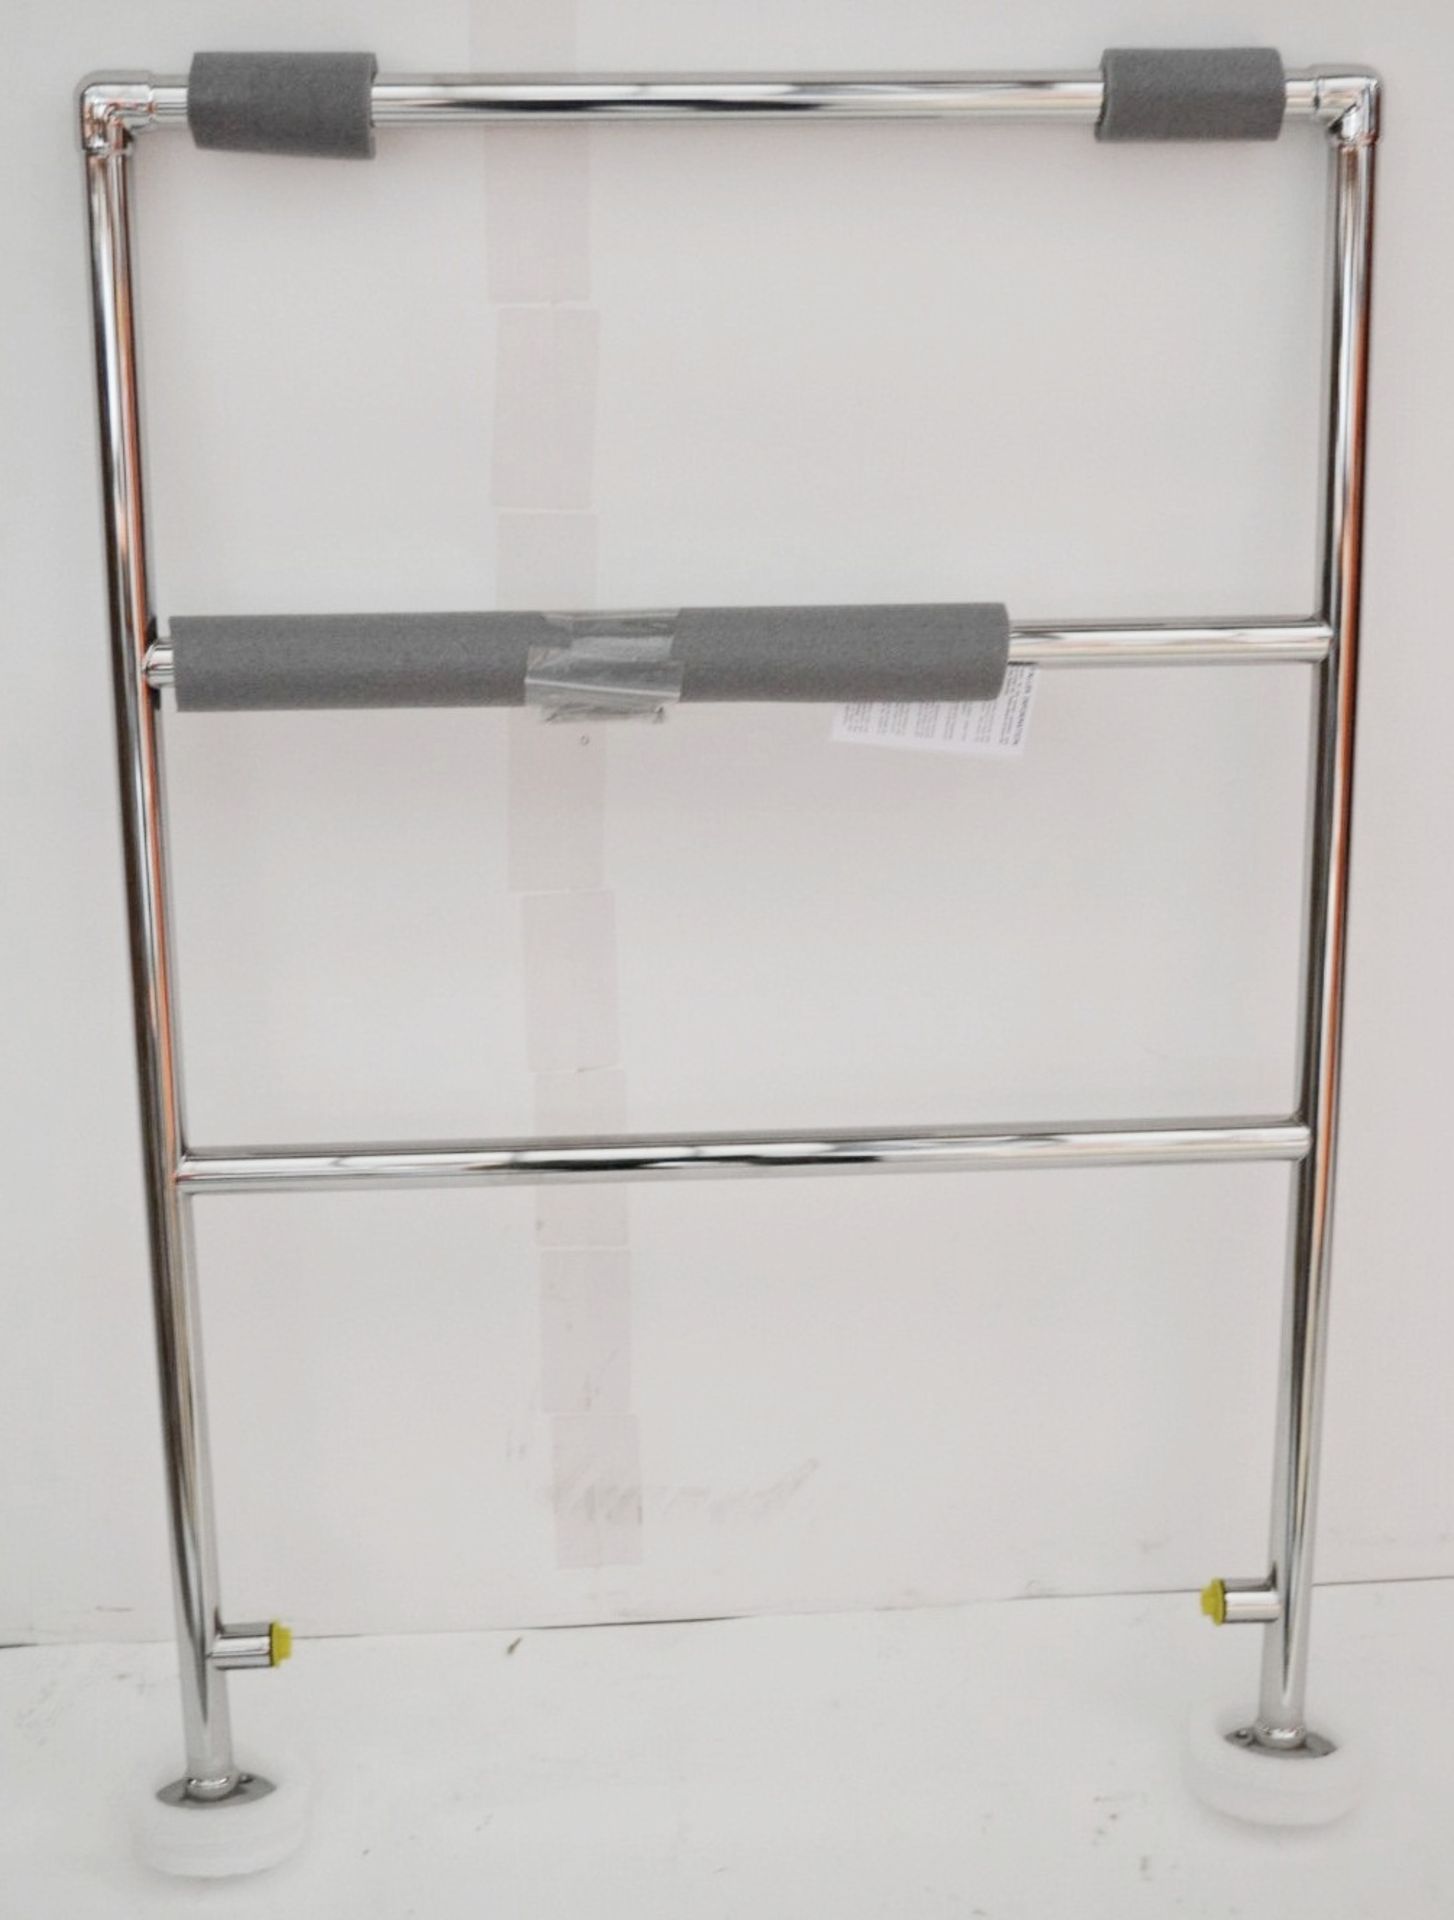 1 x Vogue Heated Towel Rail - New / Boxed Stock - Dimensions: W62 x H97cm - Ref: MWI004 - CL022 -